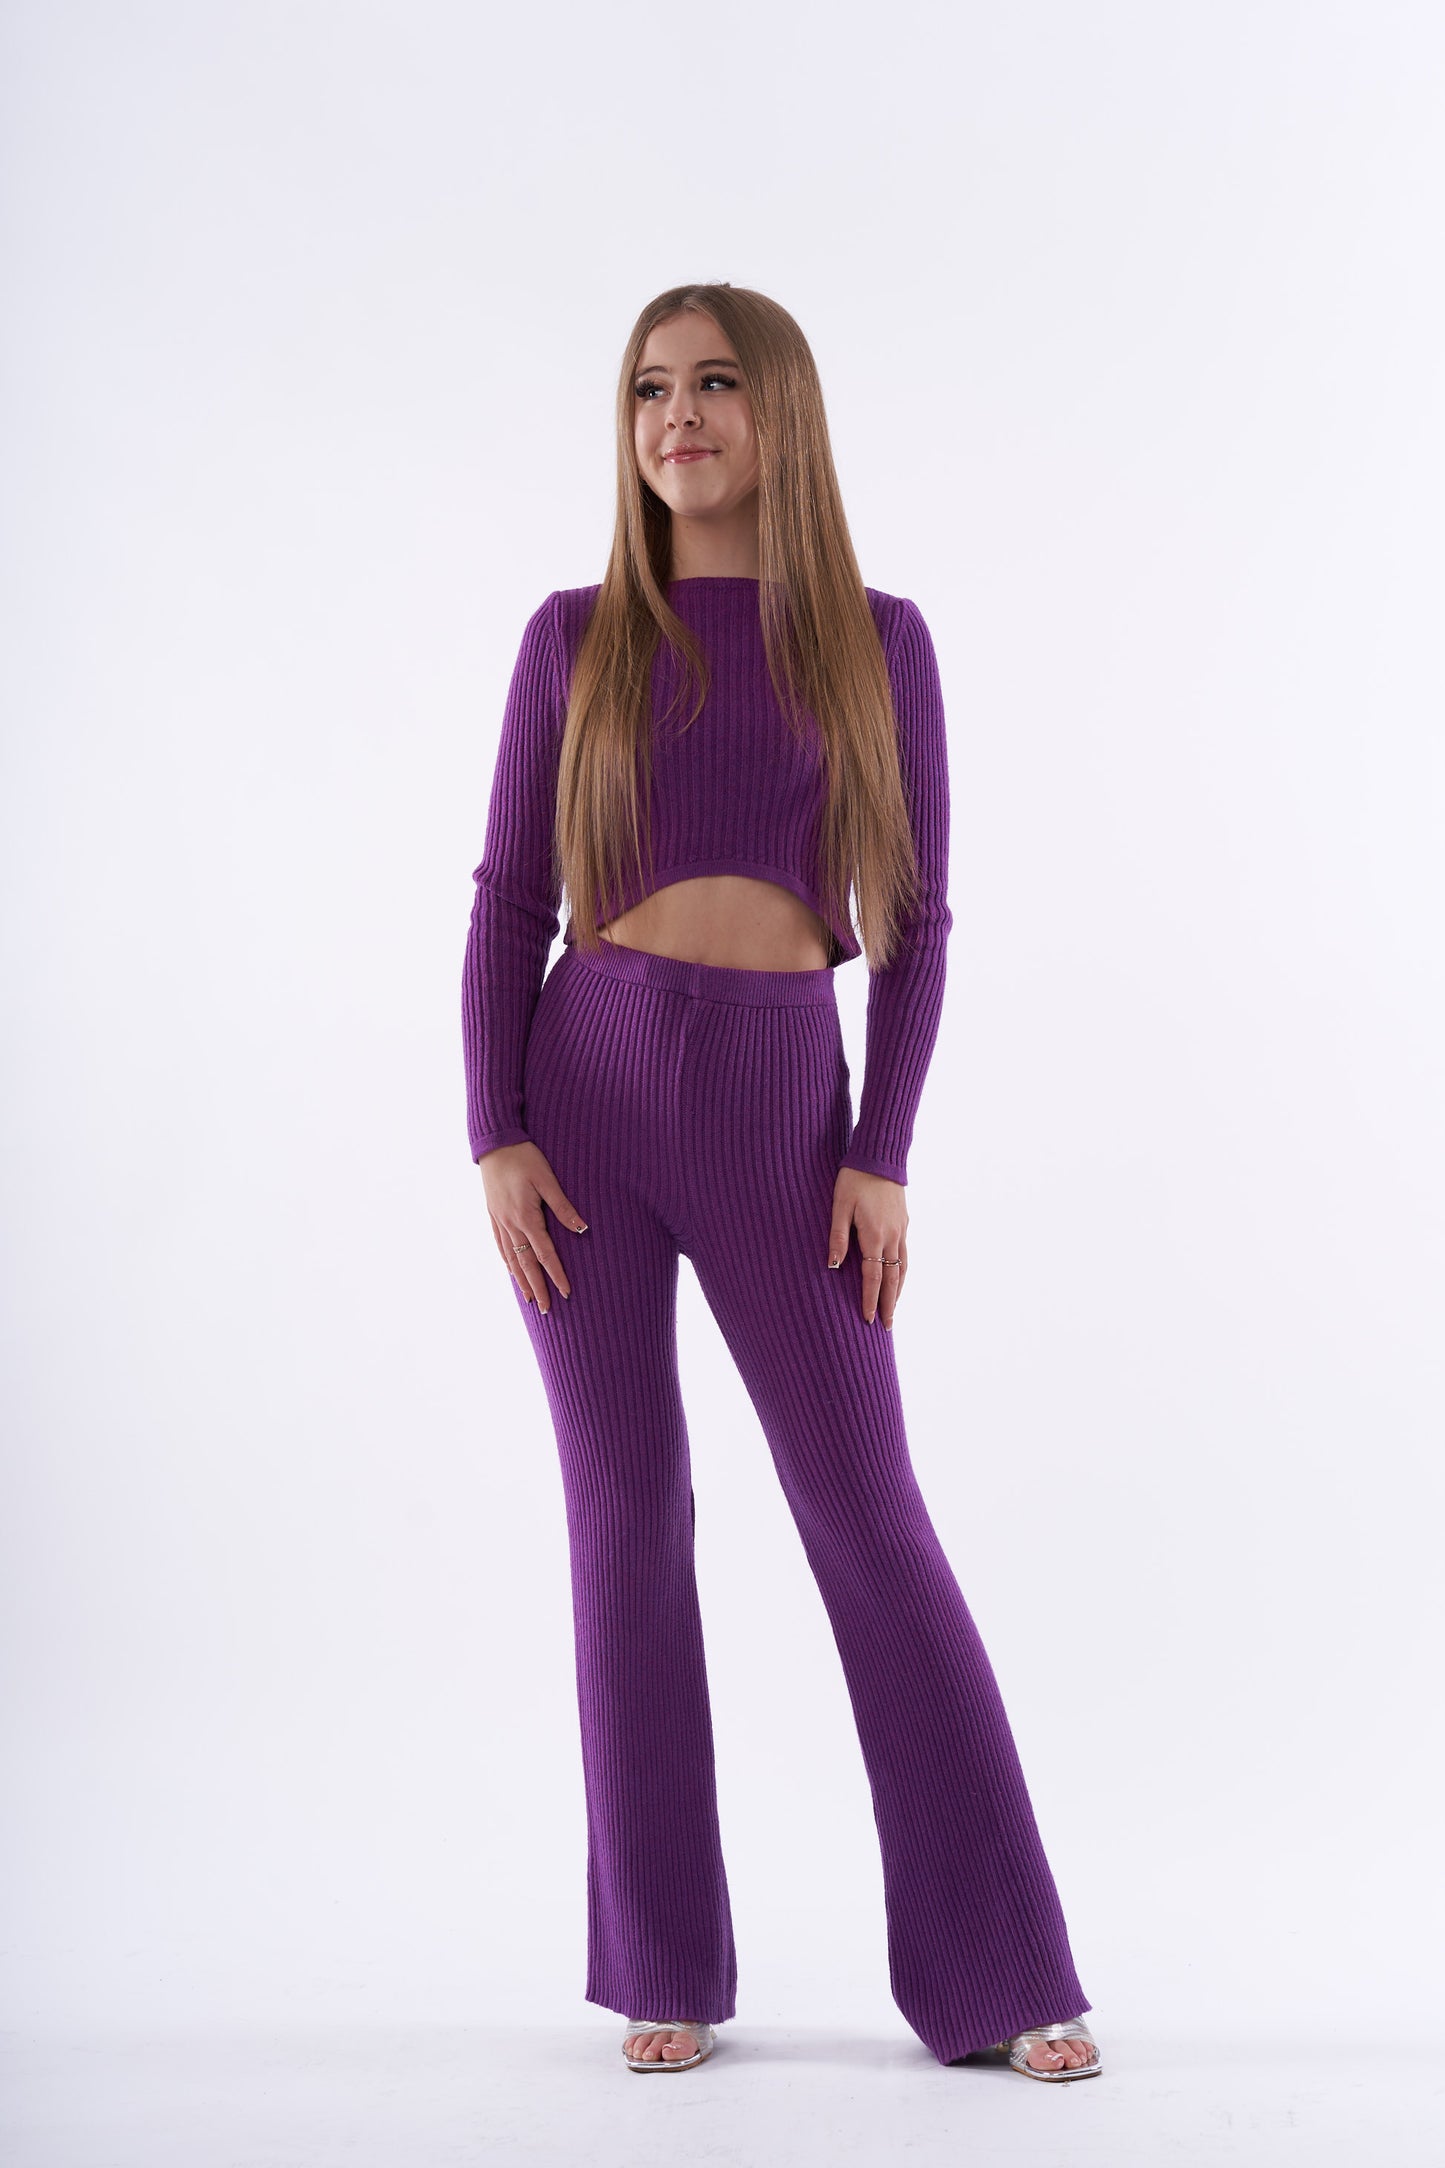 Lexi long sleeved top and flared knitted set